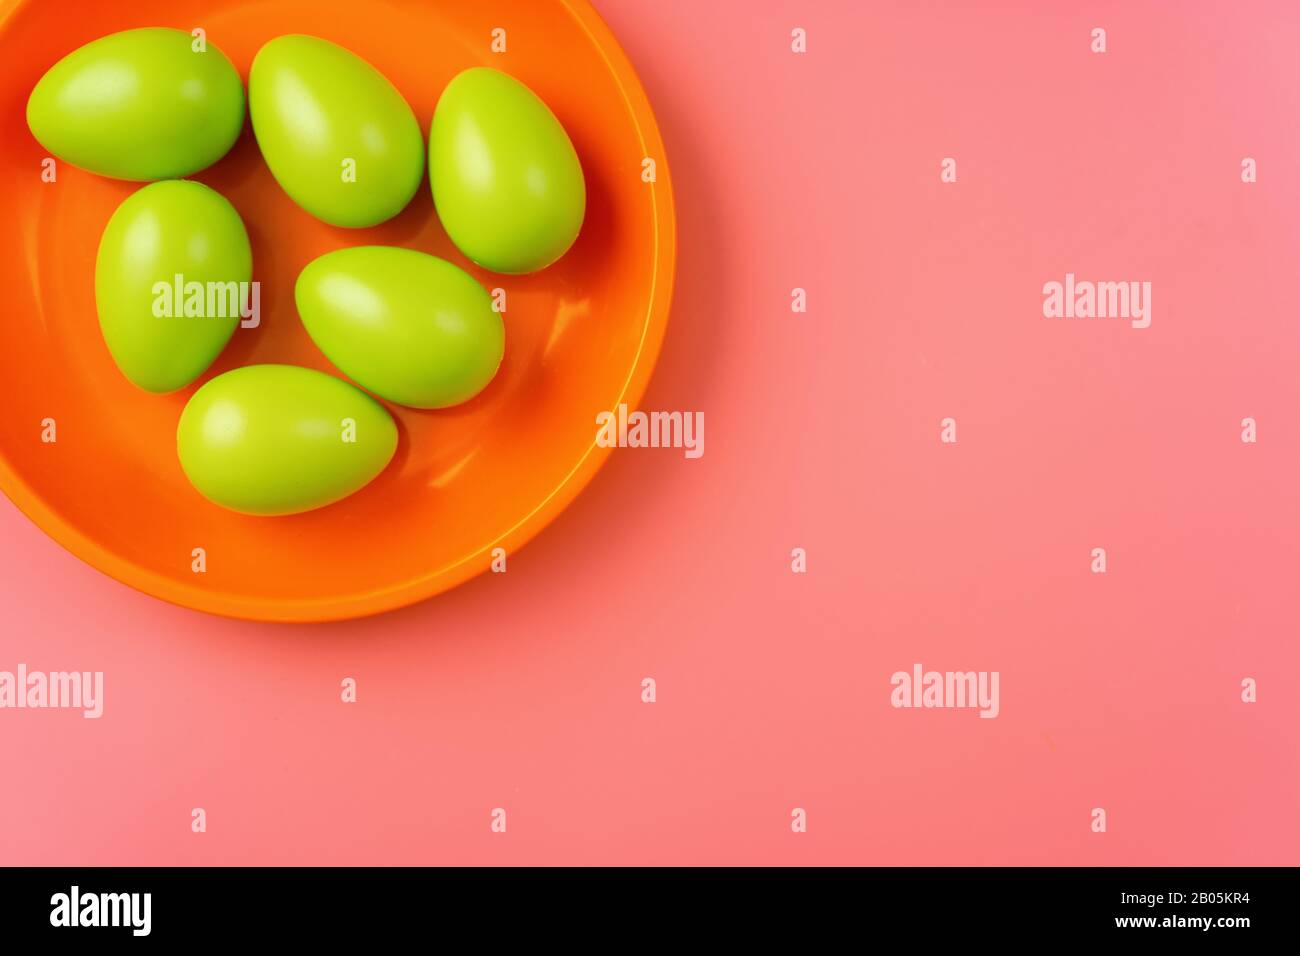 Close up of green Easter eggs in a bright plate on vibrang orange and red background Stock Photo